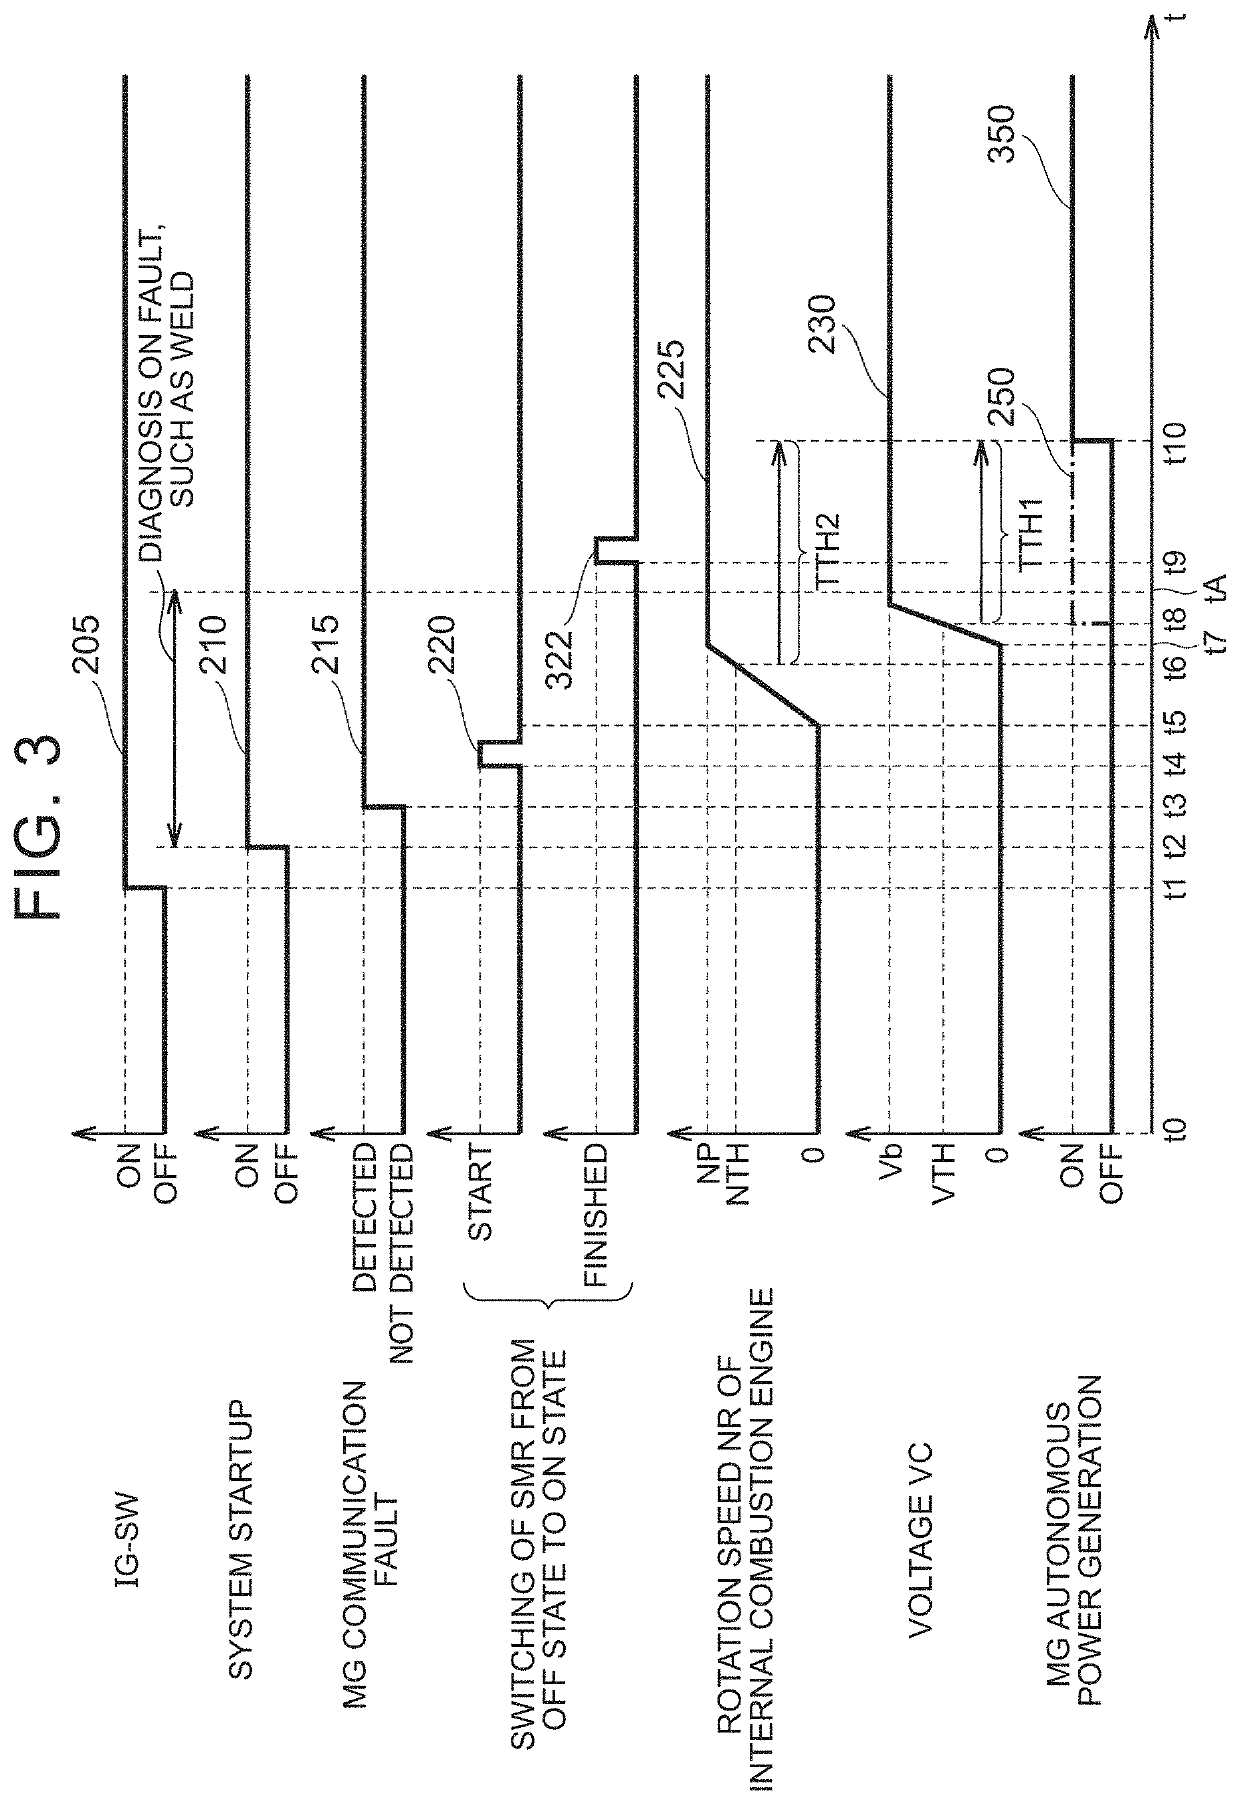 Motor control system and hybrid electric vehicle